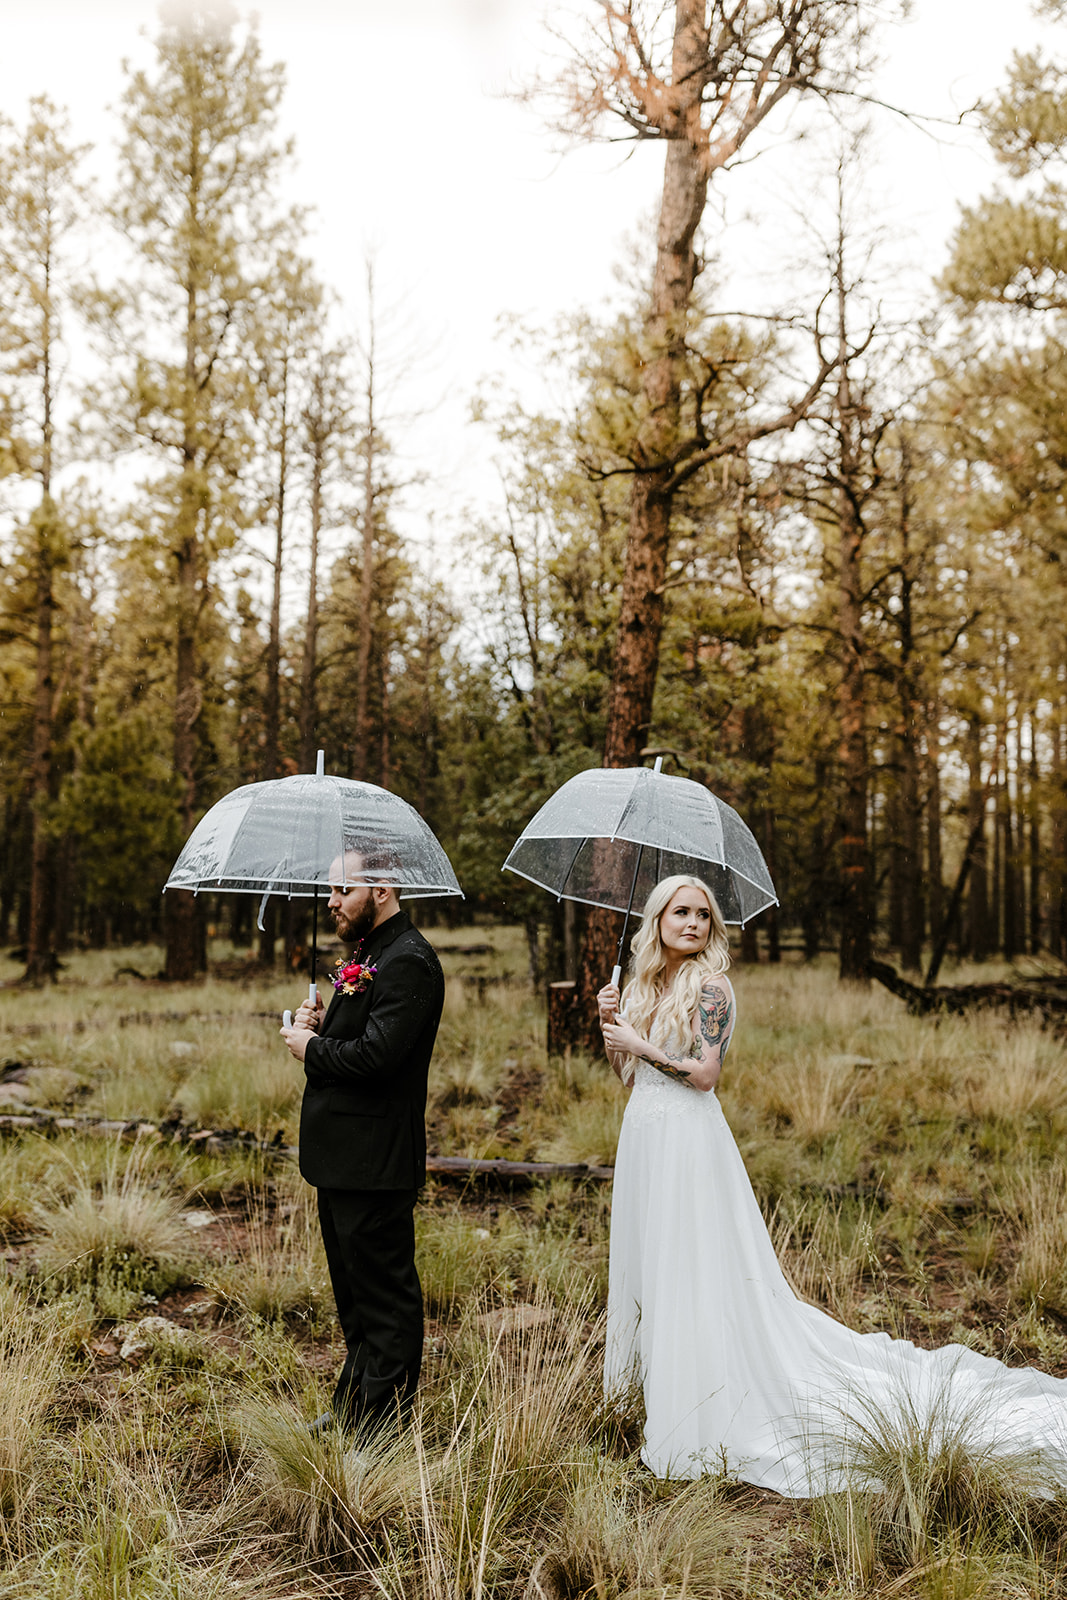 bridal couple holding umbrellas at first look on rainy wedding day